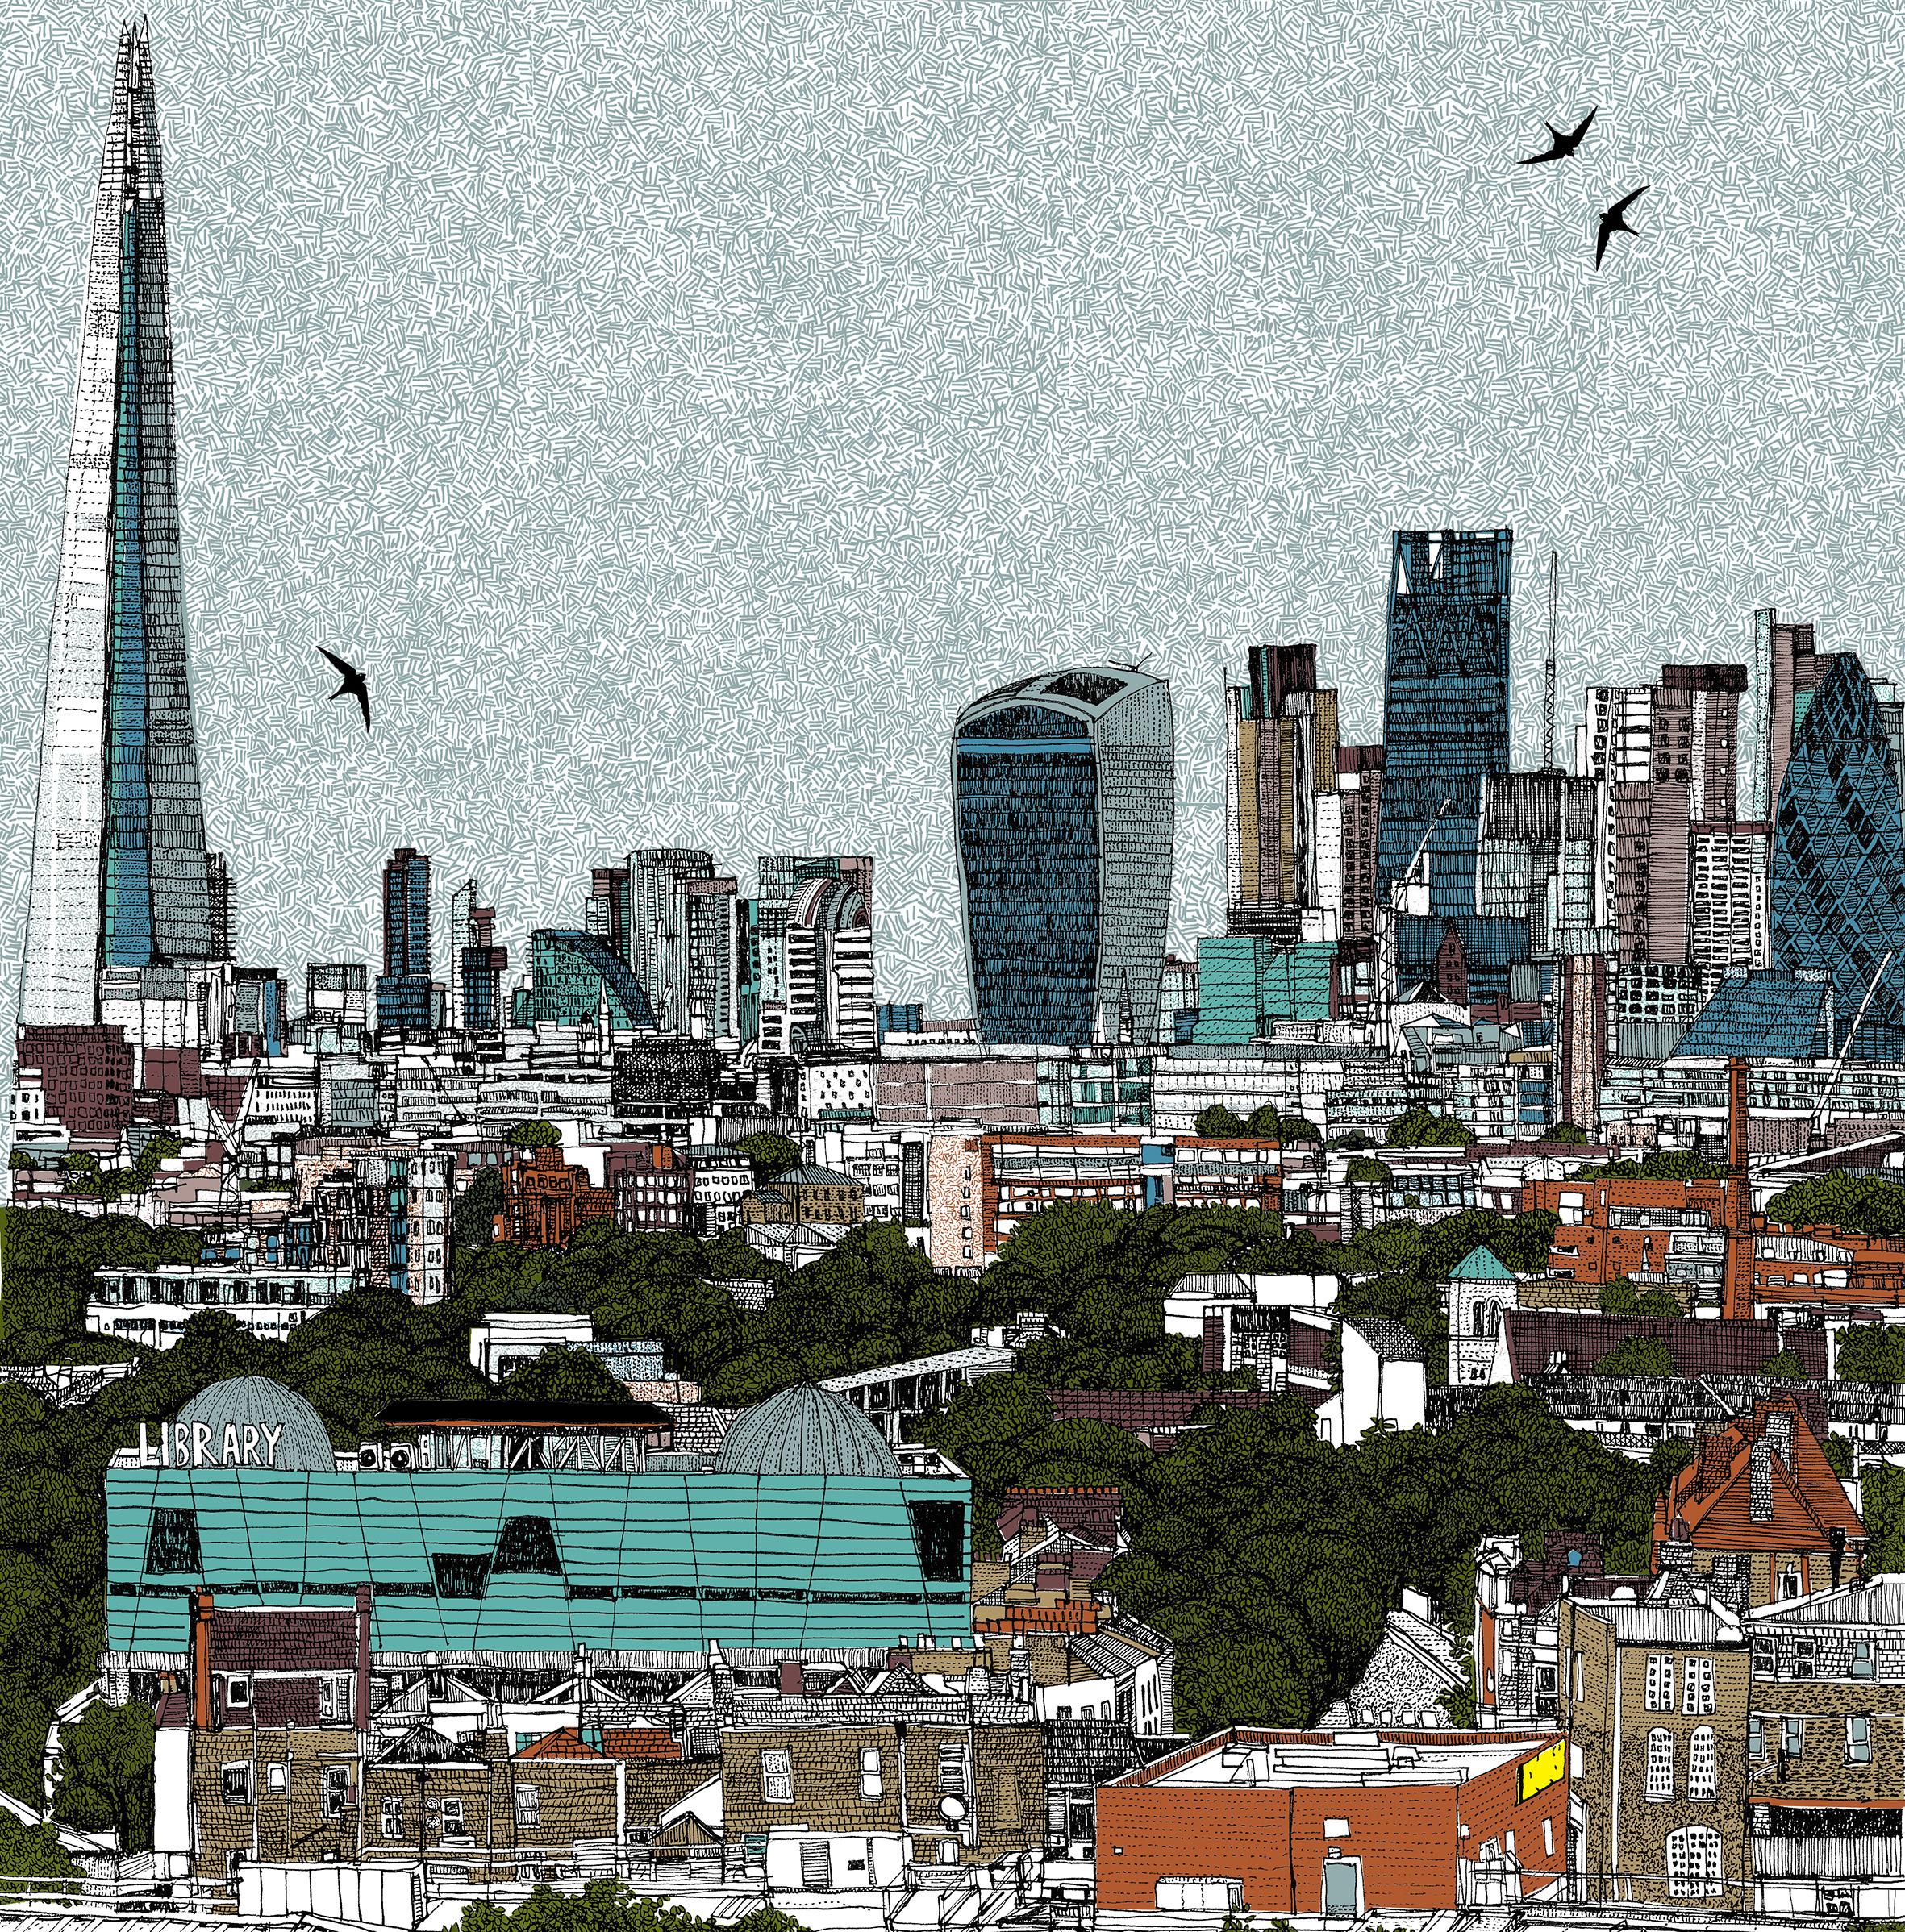 Switch Views, London and Living and Learning in London - Gray Figurative Print by Clare Halifax